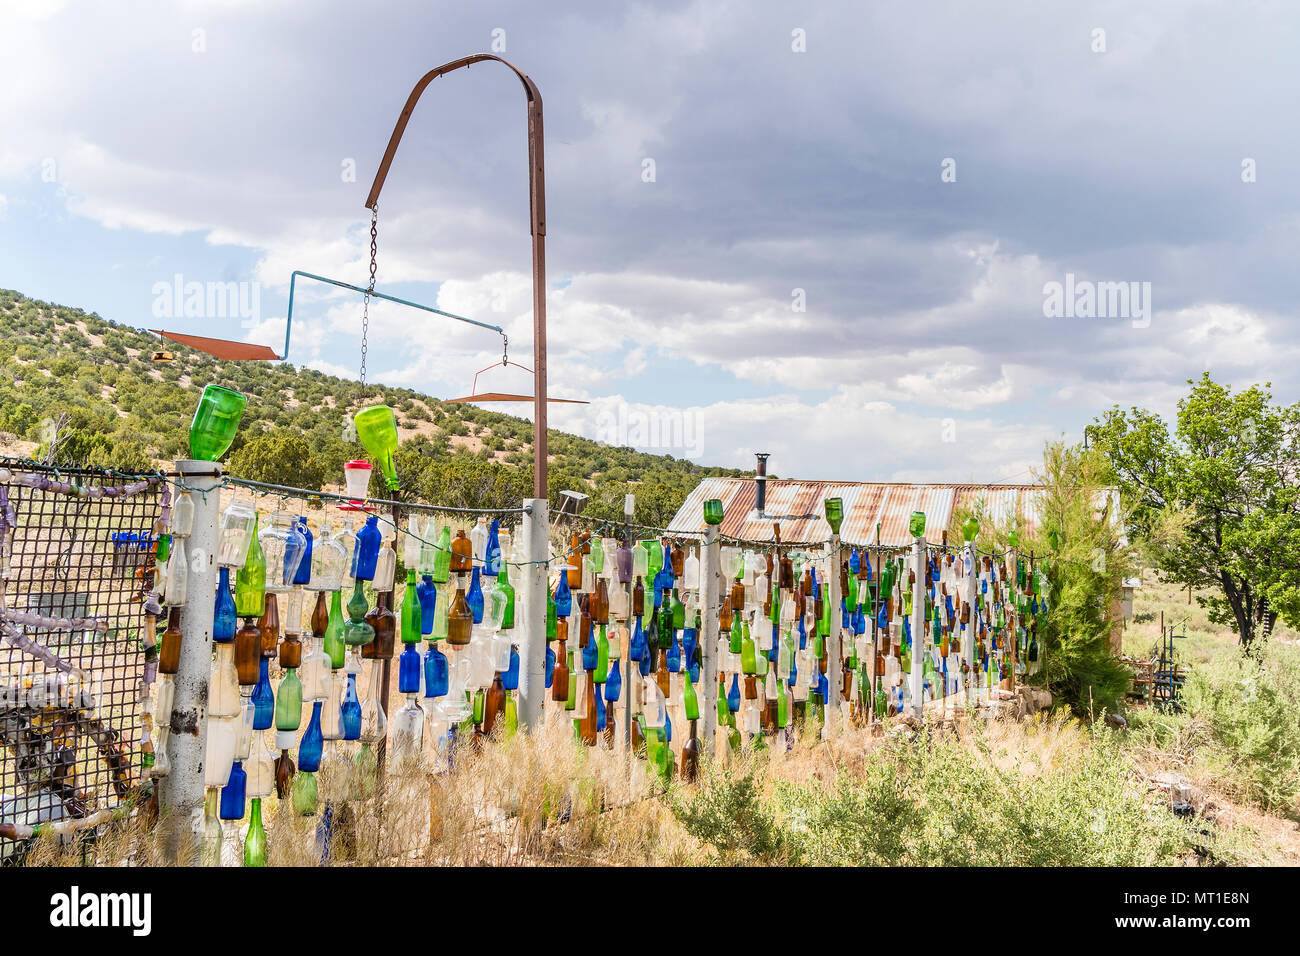 Hanging multicolored glass bottles make up a unique fence in Golden, New Mexico. Stock Photo